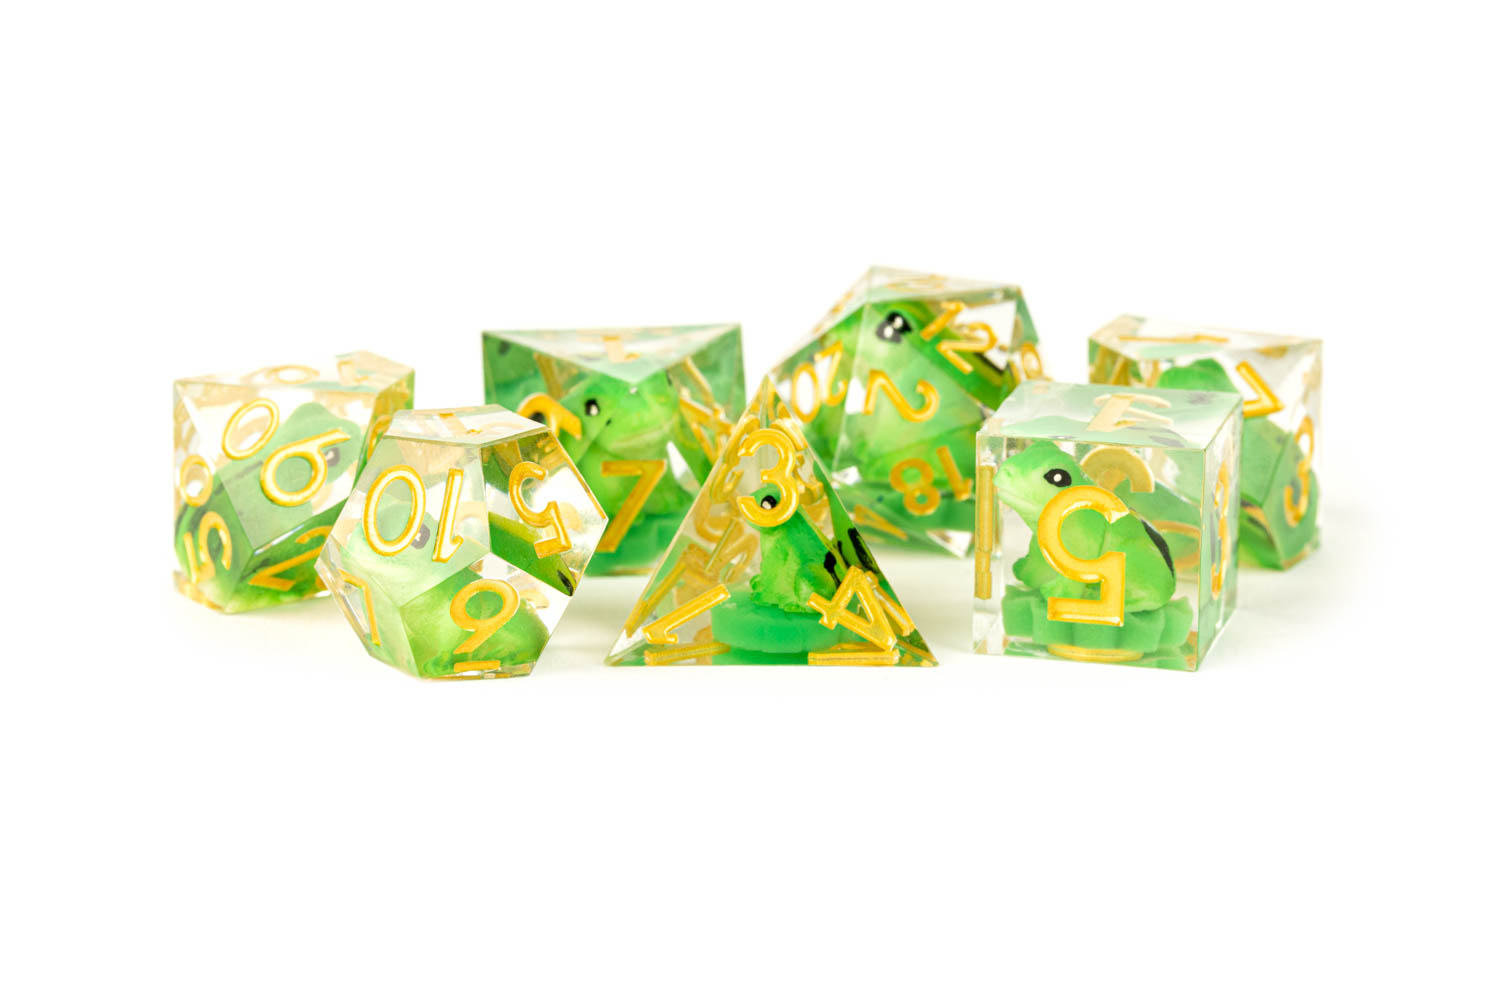 Hand Crafted Sharp Edge Dice set with Green Frogs and yellow numbers